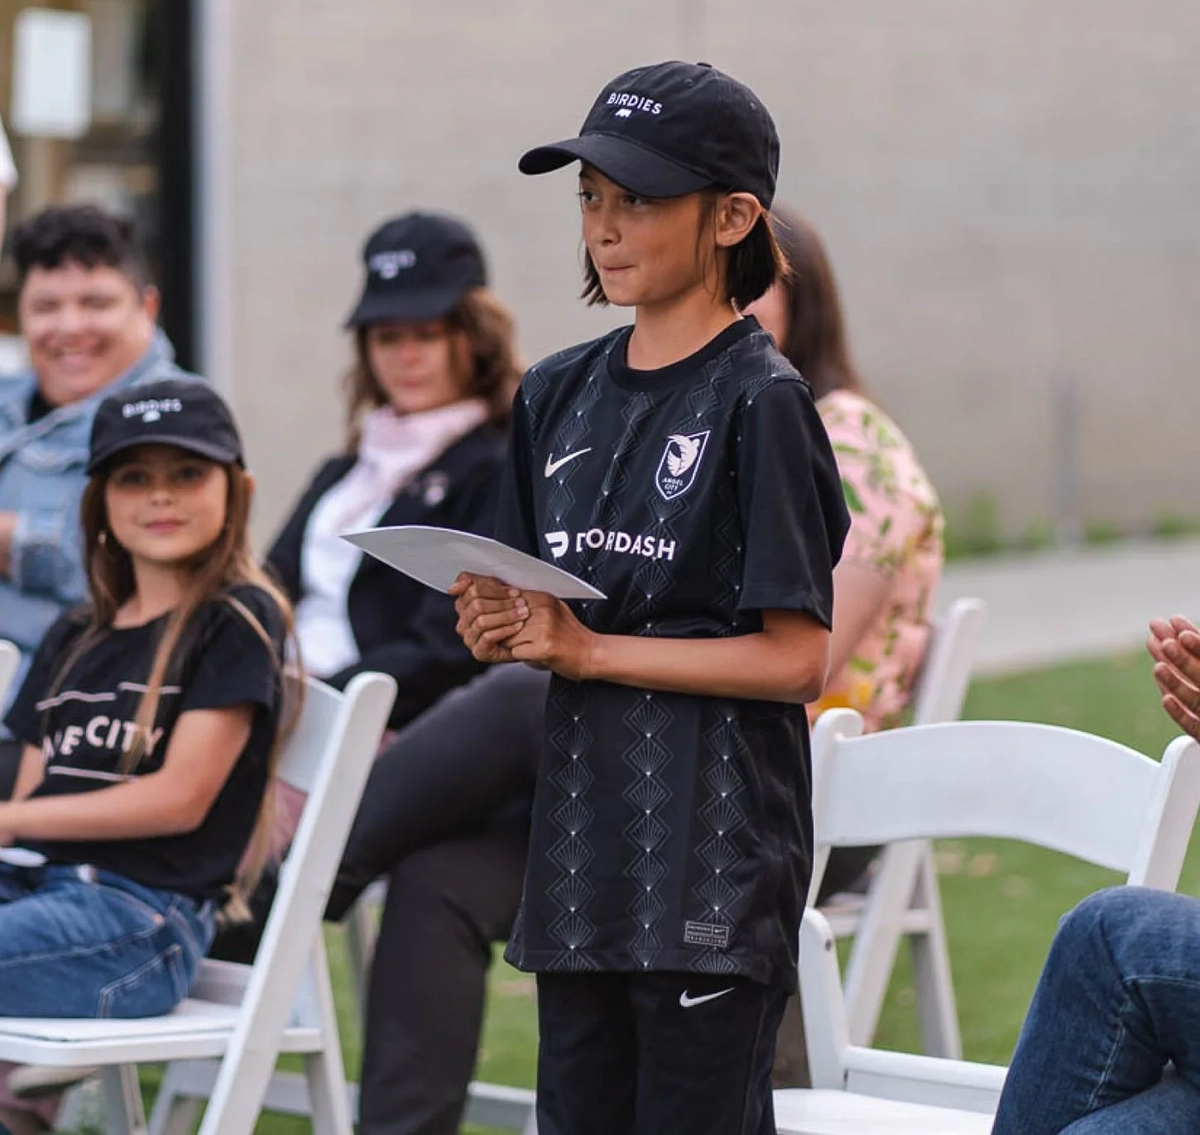 Birdies sponsors the LA Professional Women’s Football Club, Angel City FC, and has partnered with Step Up, a leading mentorship non-profit, to create the Fly Together Mentorship Program that assists over 100 girls and teens who identify as gender nonconforming